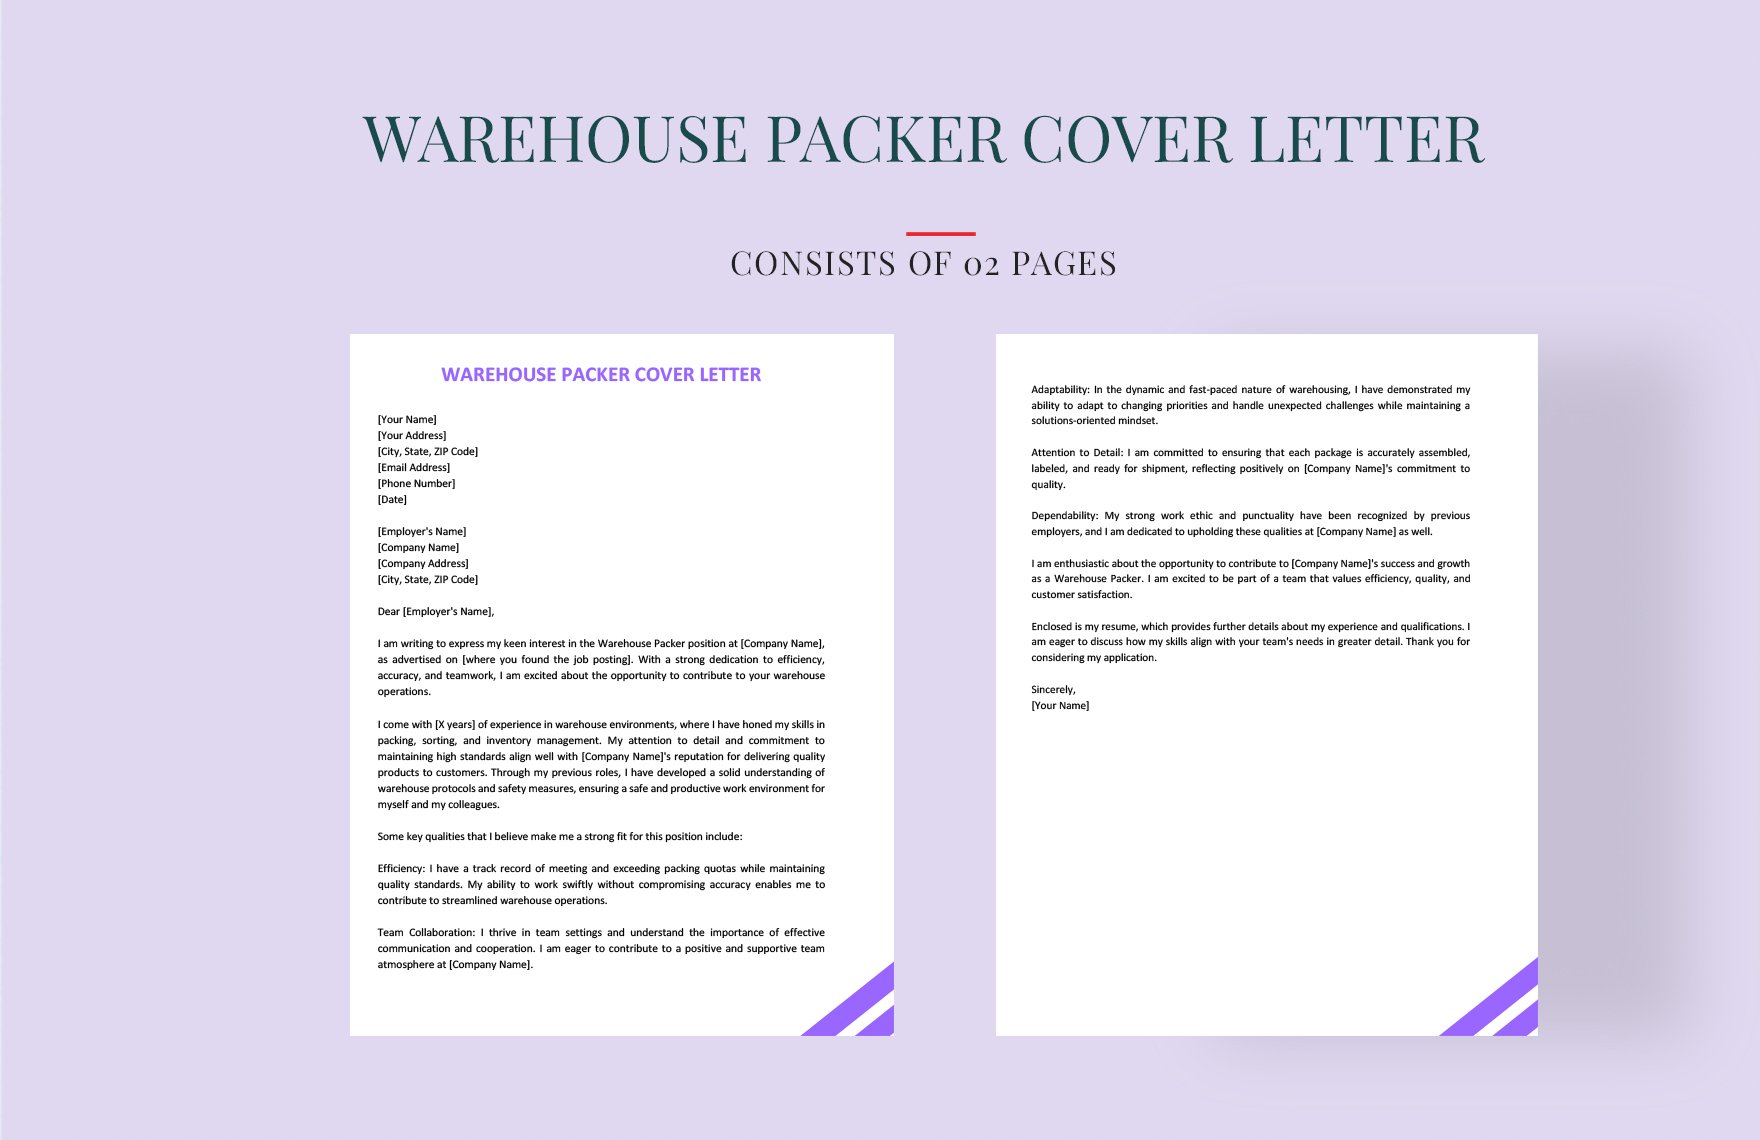 Warehouse Packer Cover Letter in Word, Google Docs, PDF